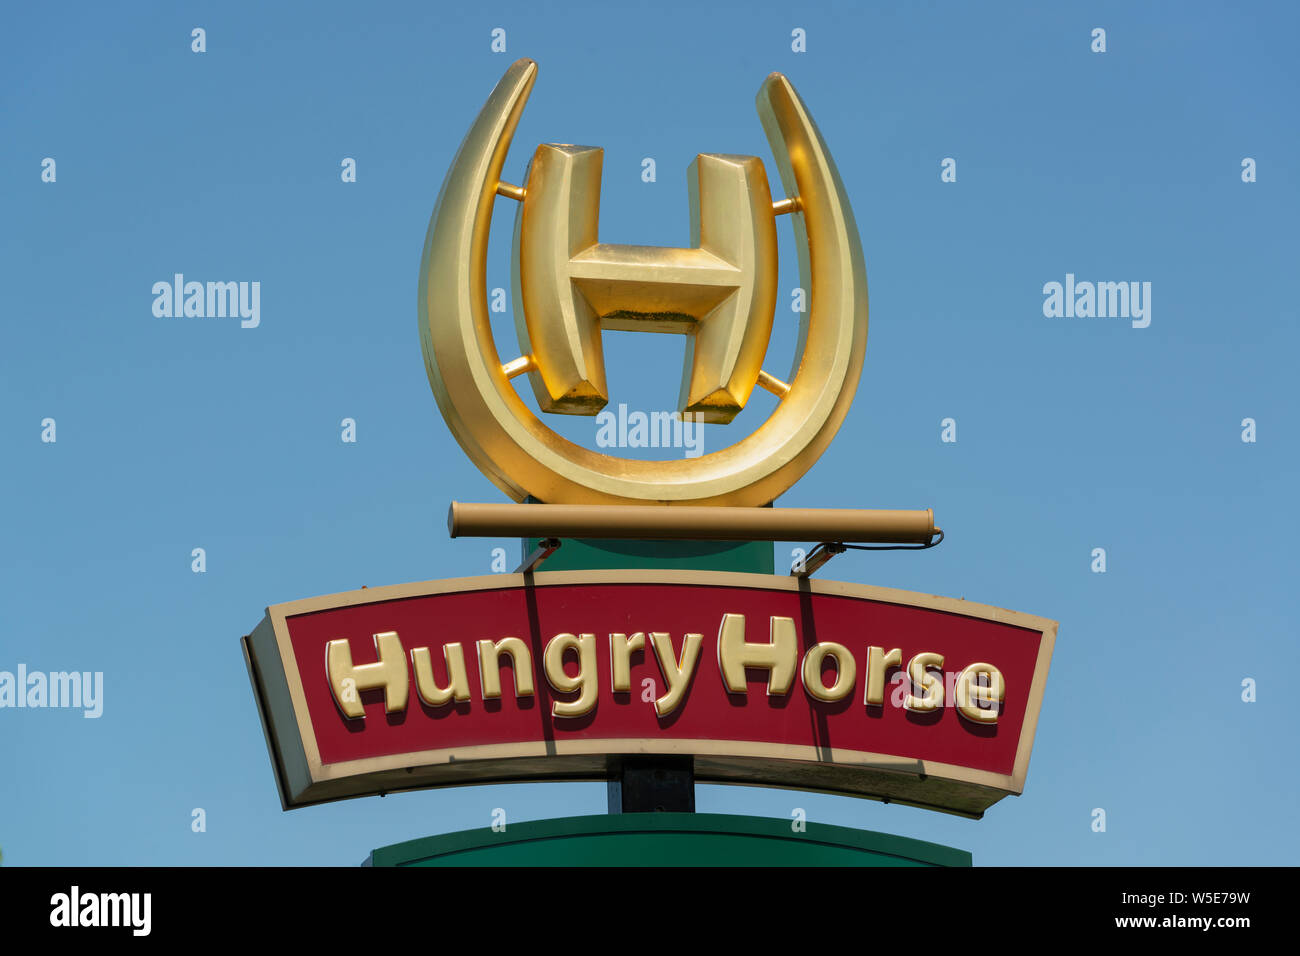 Signage for a Hungry Horse eatery located outside one of the pub-restaurant chain's establishments in Manchester. (Editorial use only). Stock Photo